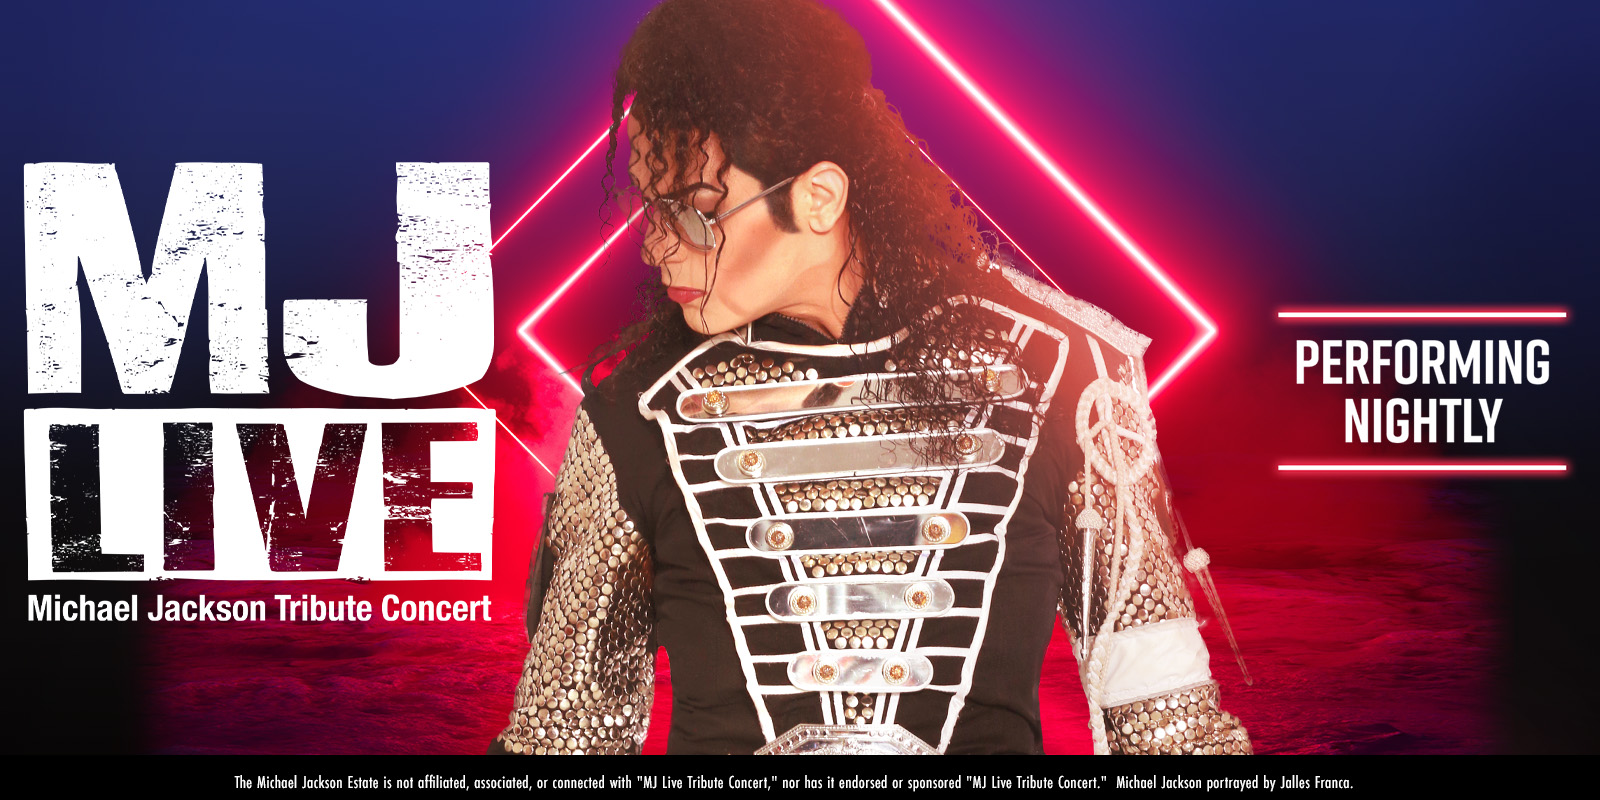 MJ Live poster with logo and photo of Michael Jackson